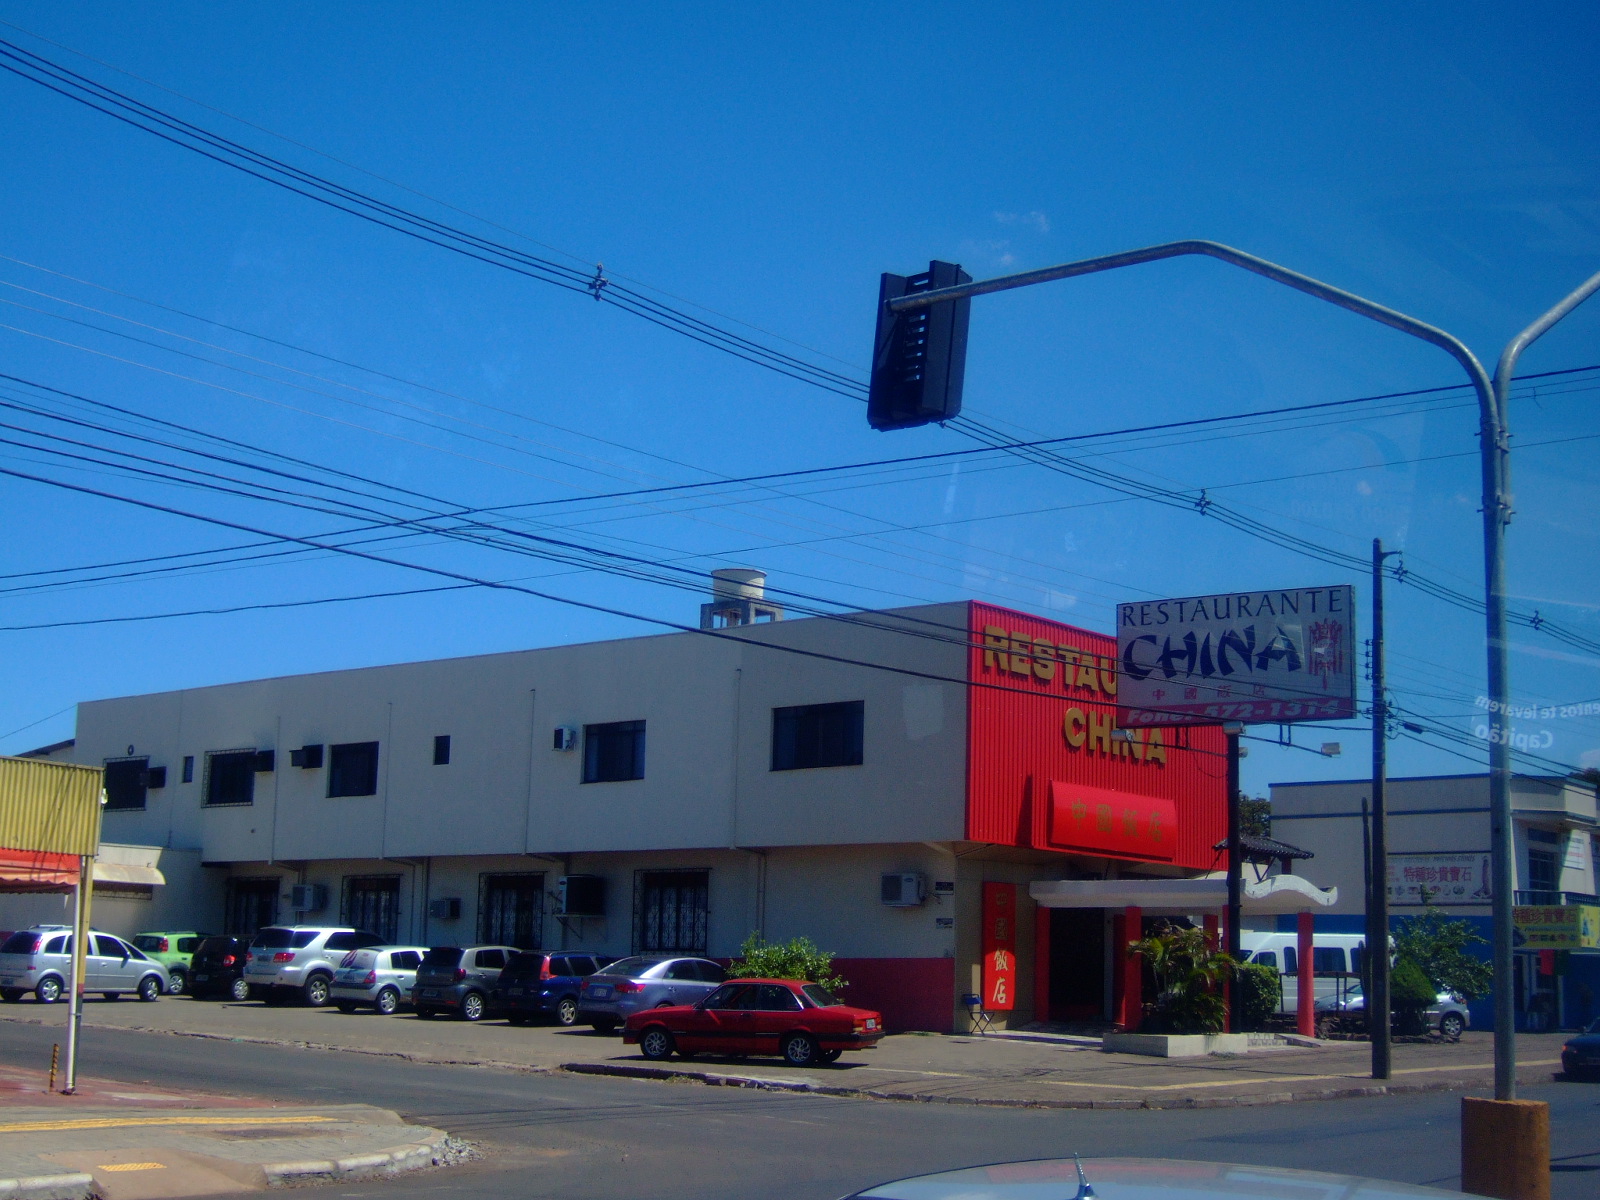 a business sits at an intersection with cars parked nearby